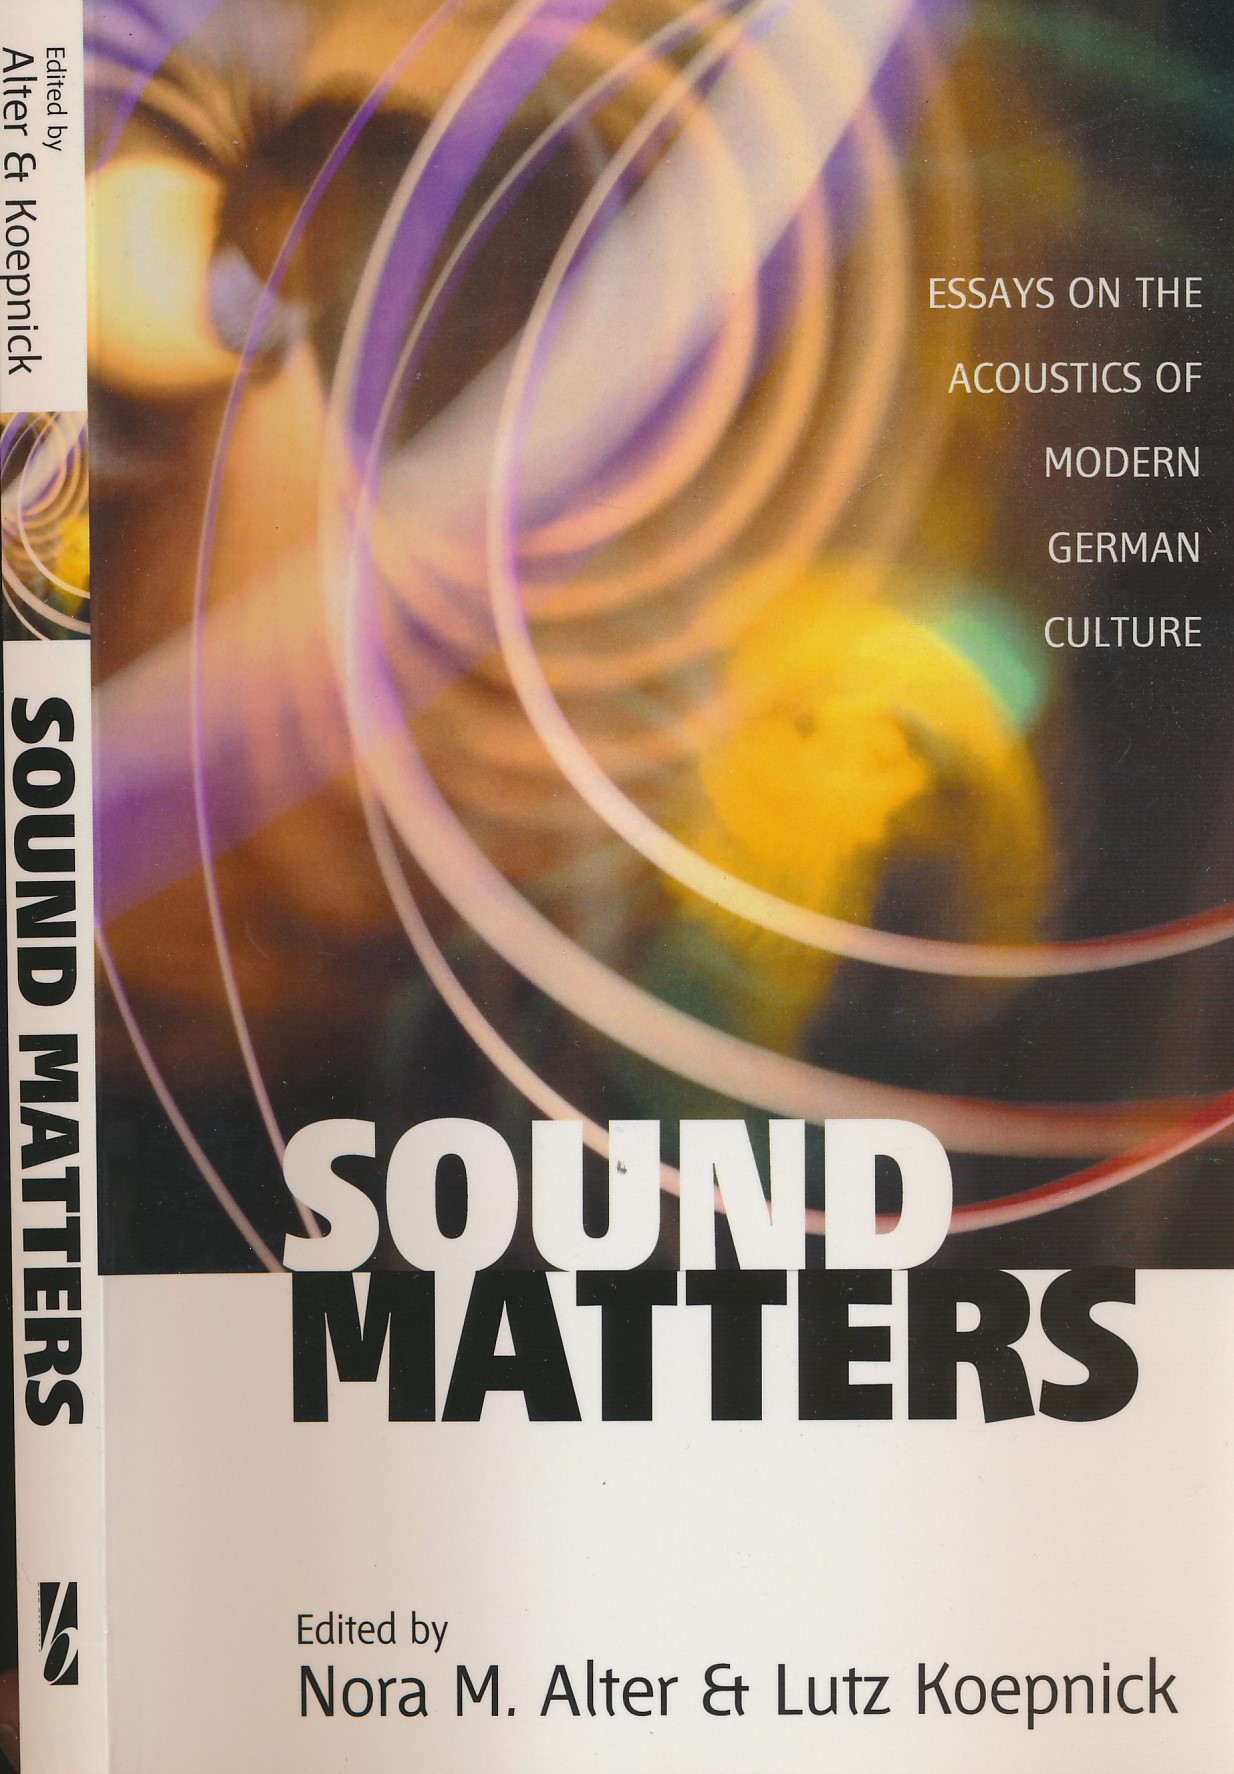 Sound Matters. Essays on the Acoustics of Modern German Culture